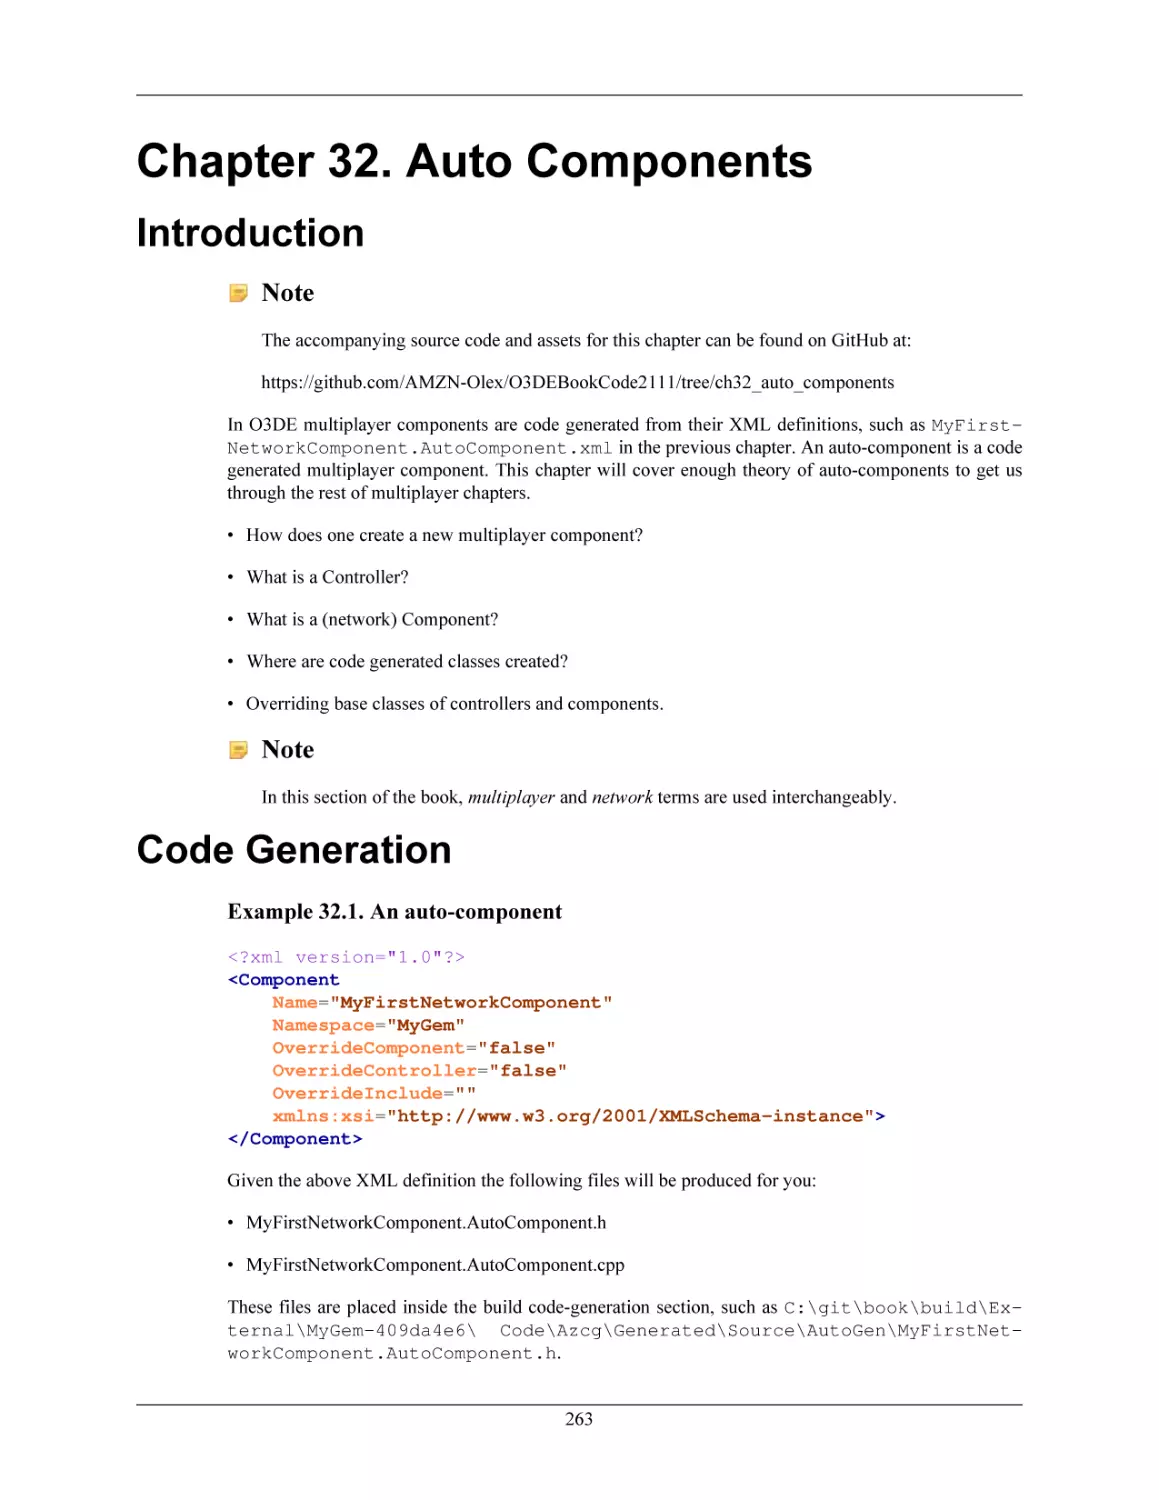 Chapter 32. Auto Components
Introduction
Code Generation